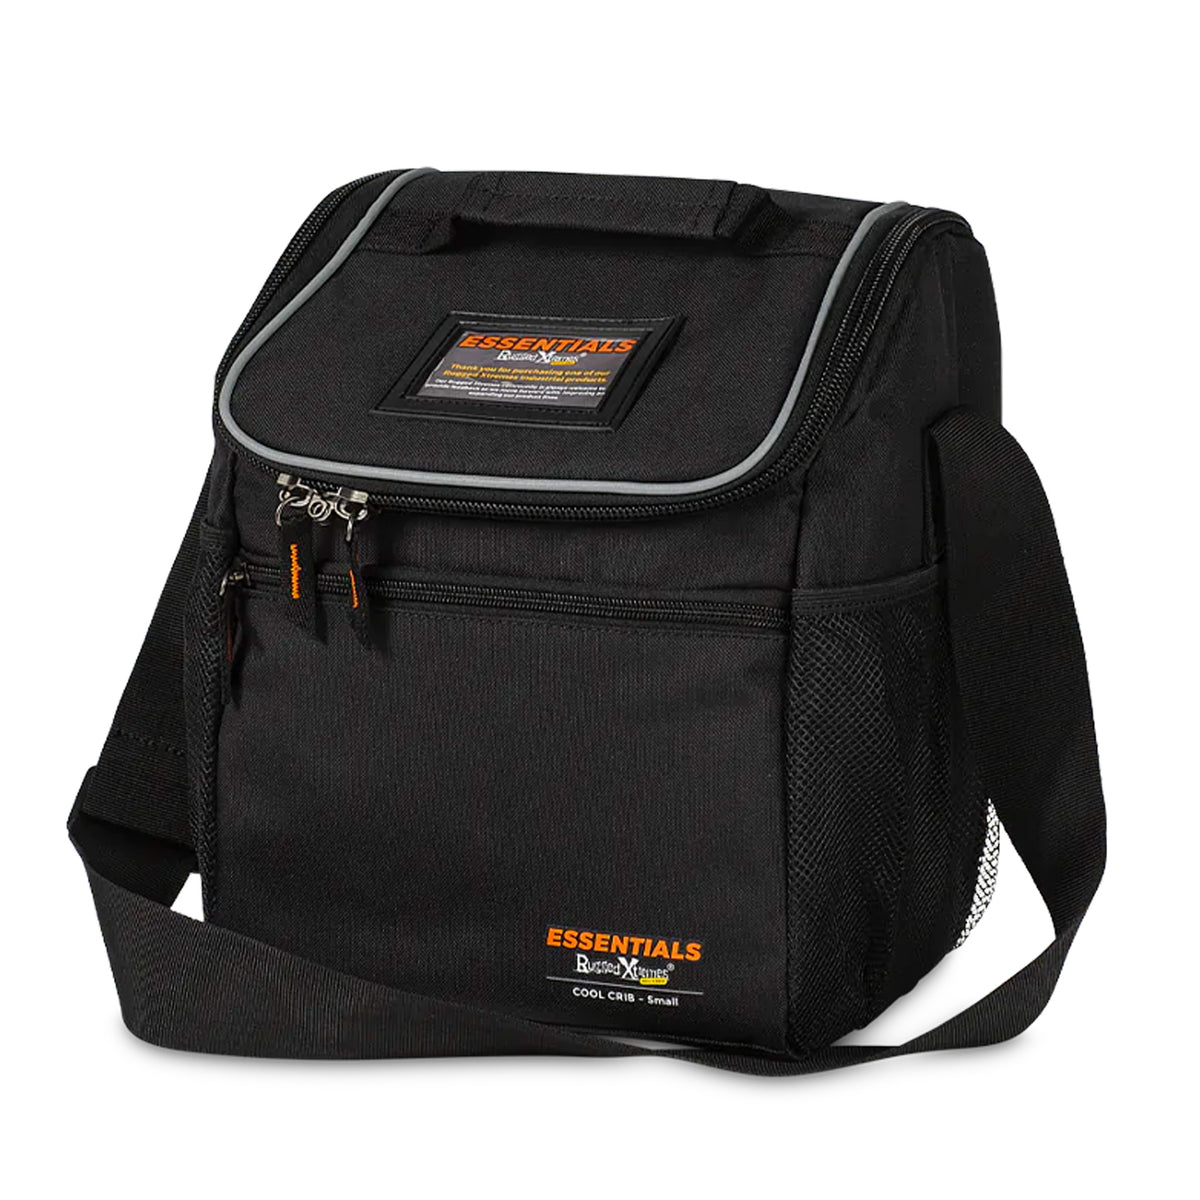 rugged xtreme cool canvas crib bag small in black